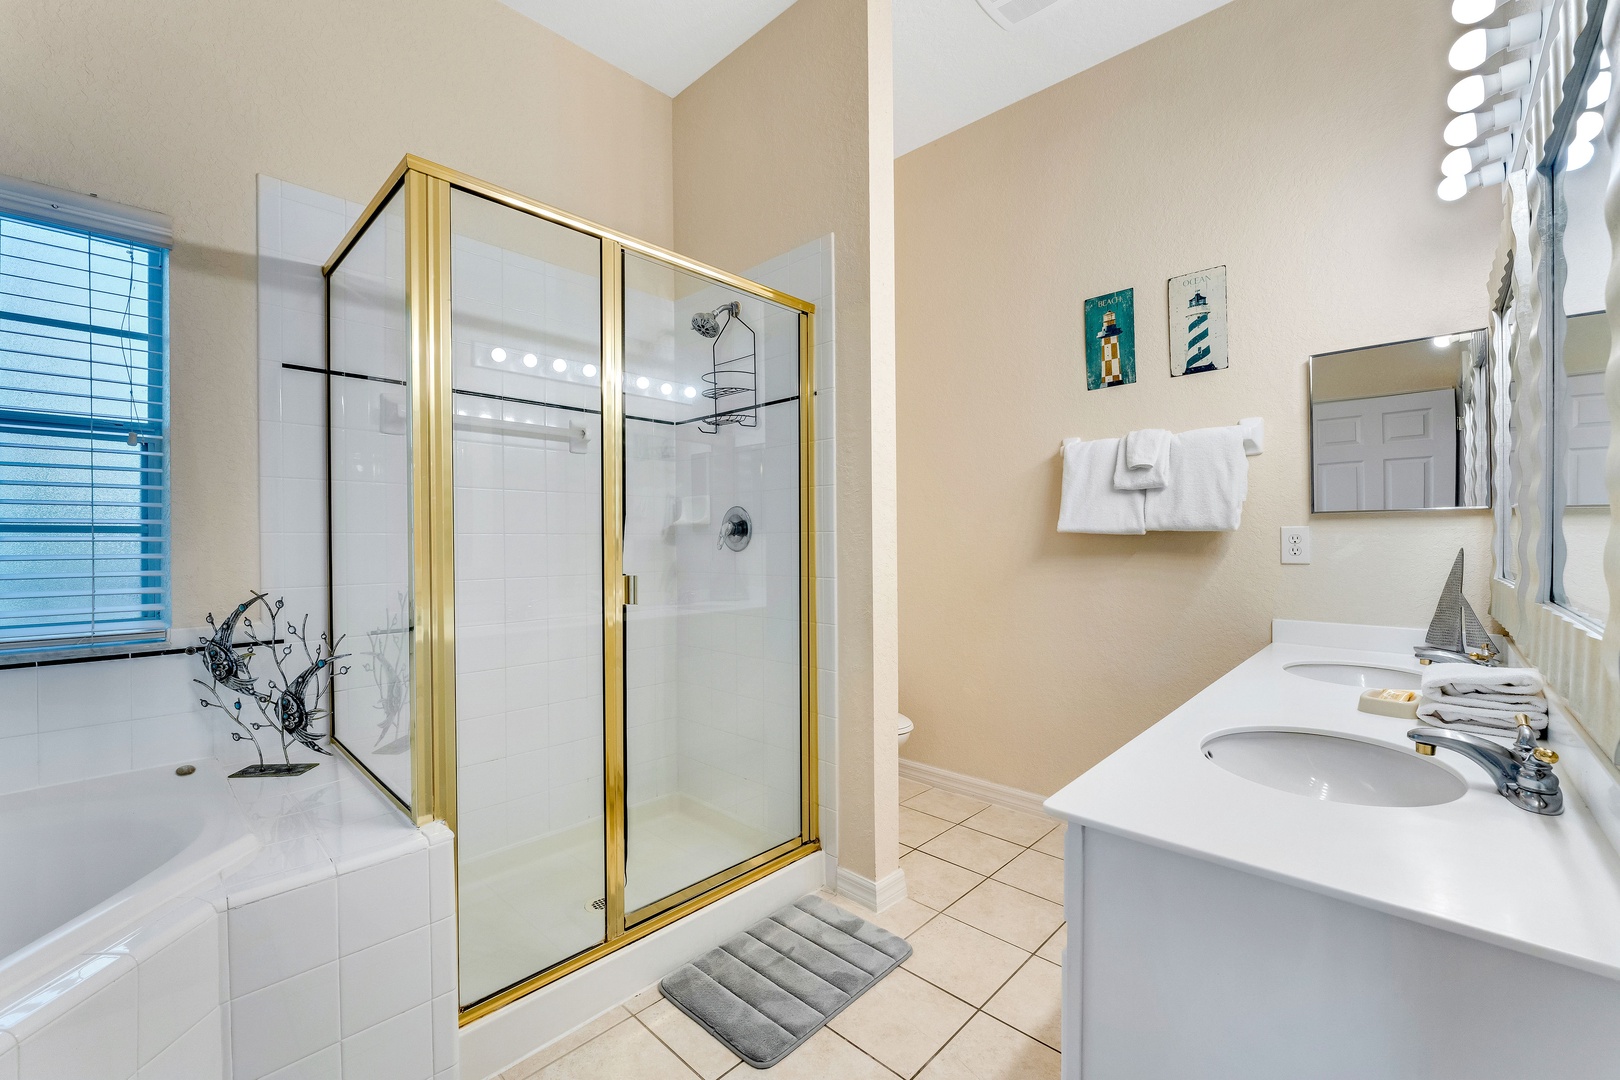 The king ensuite includes a dual vanity, glass shower, & luxe soaking tub